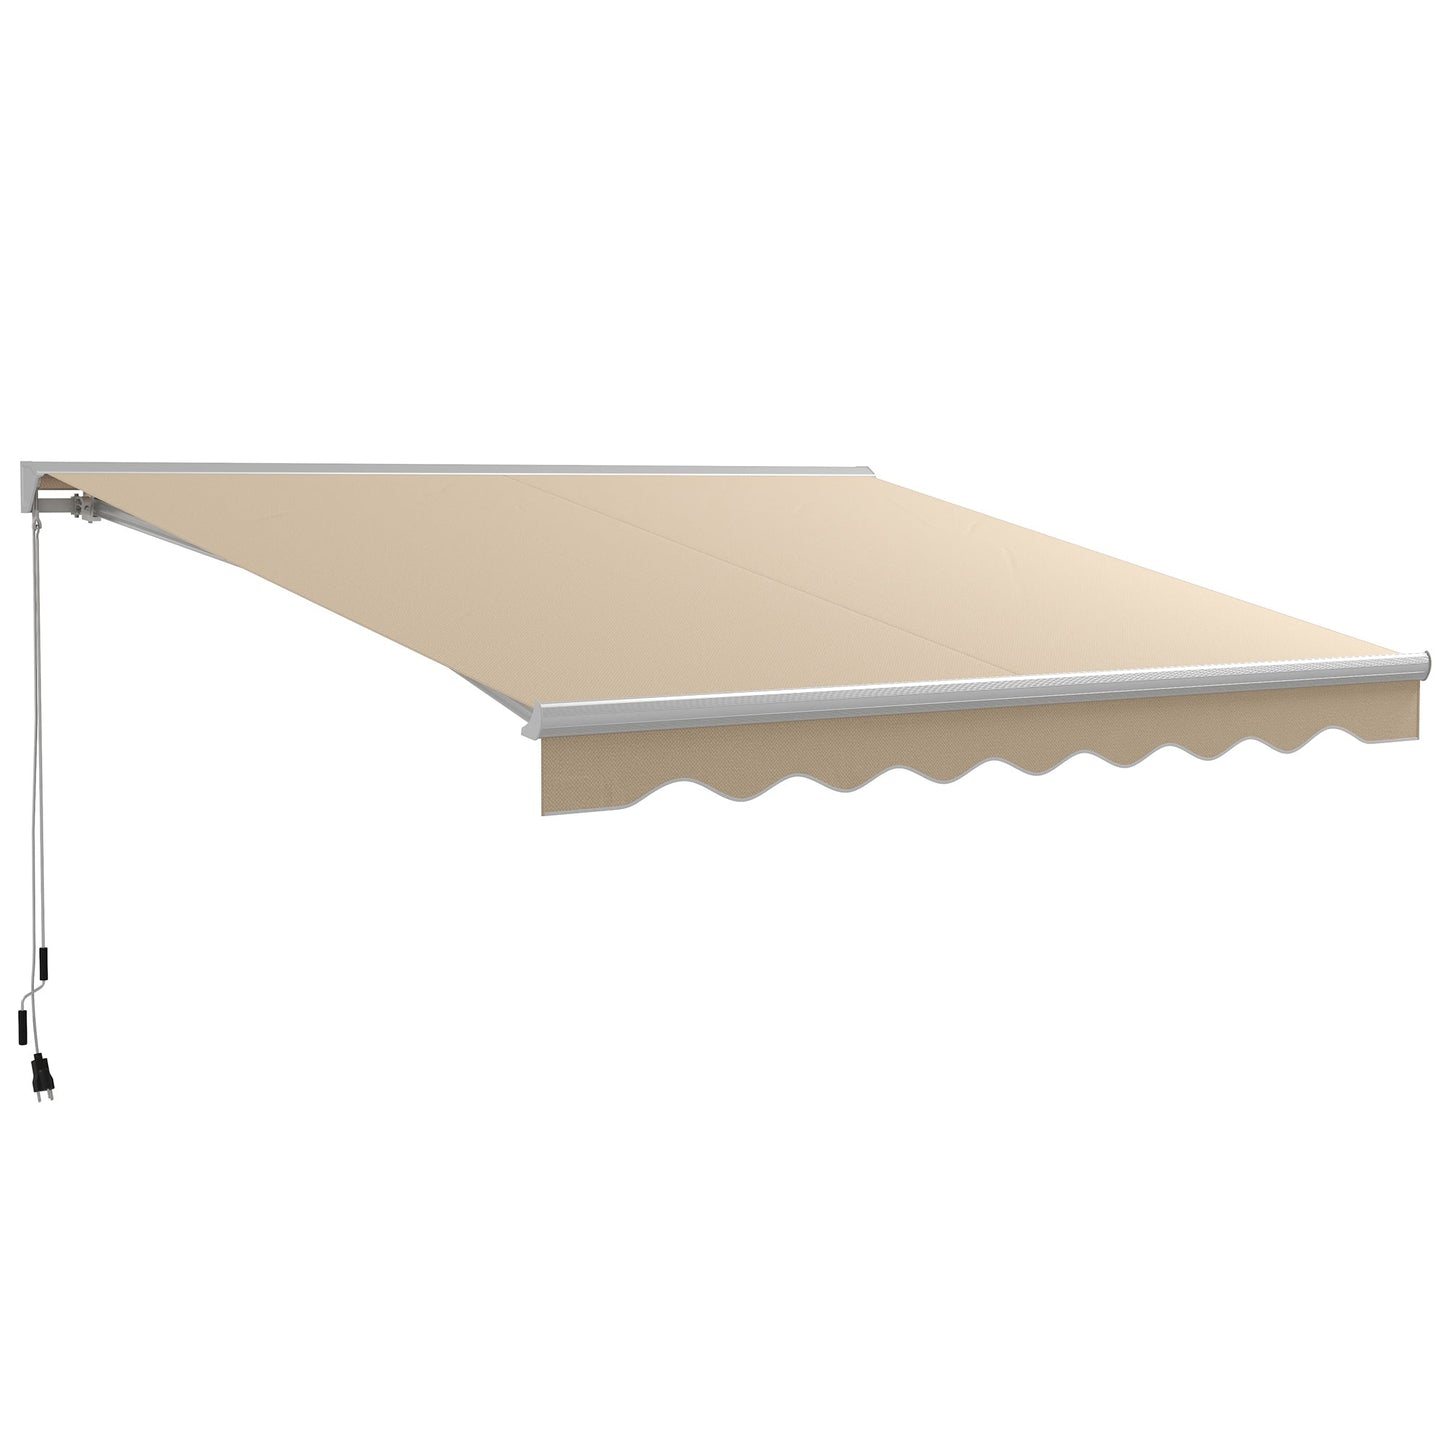 -Outsunny 13' x 10' Electric Awning, Retractable Awning with LED Lights and Remote Controller for Door and Window, Cream White - Outdoor Style Company